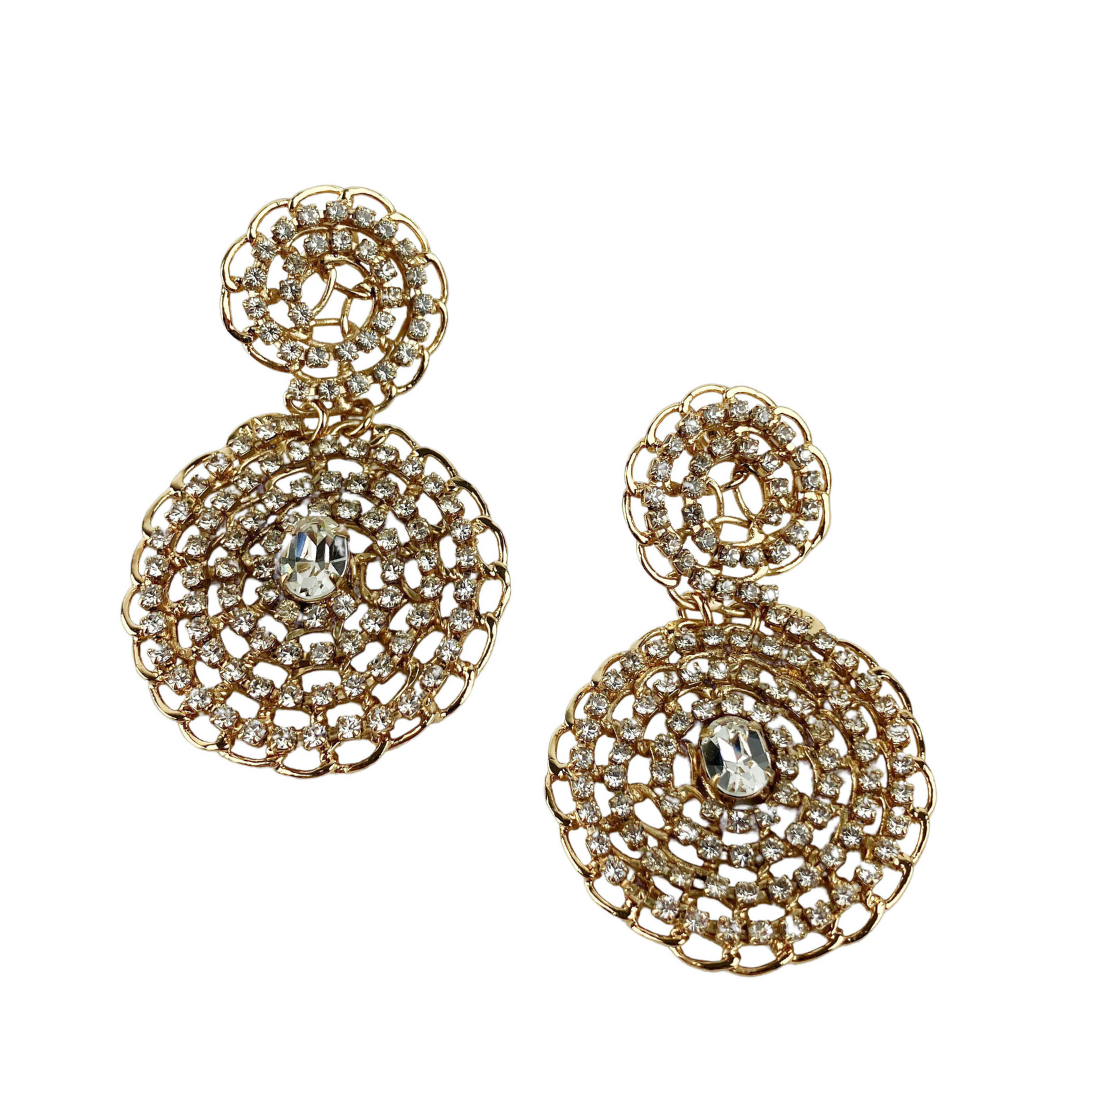 Gas Bijoux Onde Gourmette Gold Drop Earrings with Crystals - Discounts on Gas Bijoux at UAL